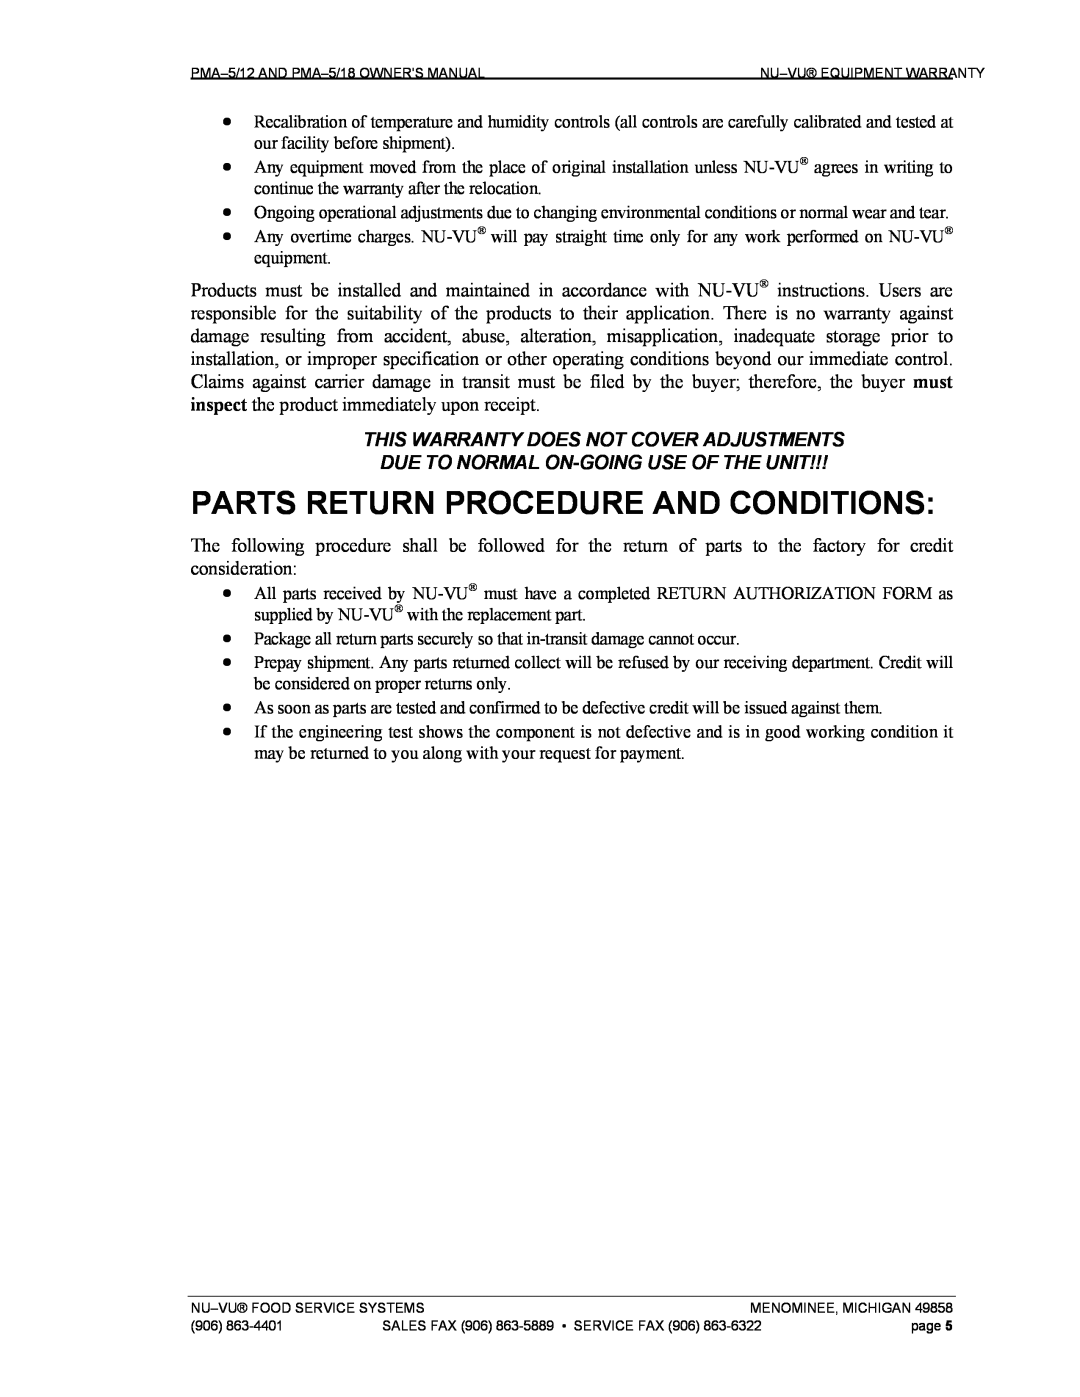 Nu-Vu PMA -5/12, PMA 5/18 owner manual Parts Return Procedure And Conditions, This Warranty Does Not Cover Adjustments 